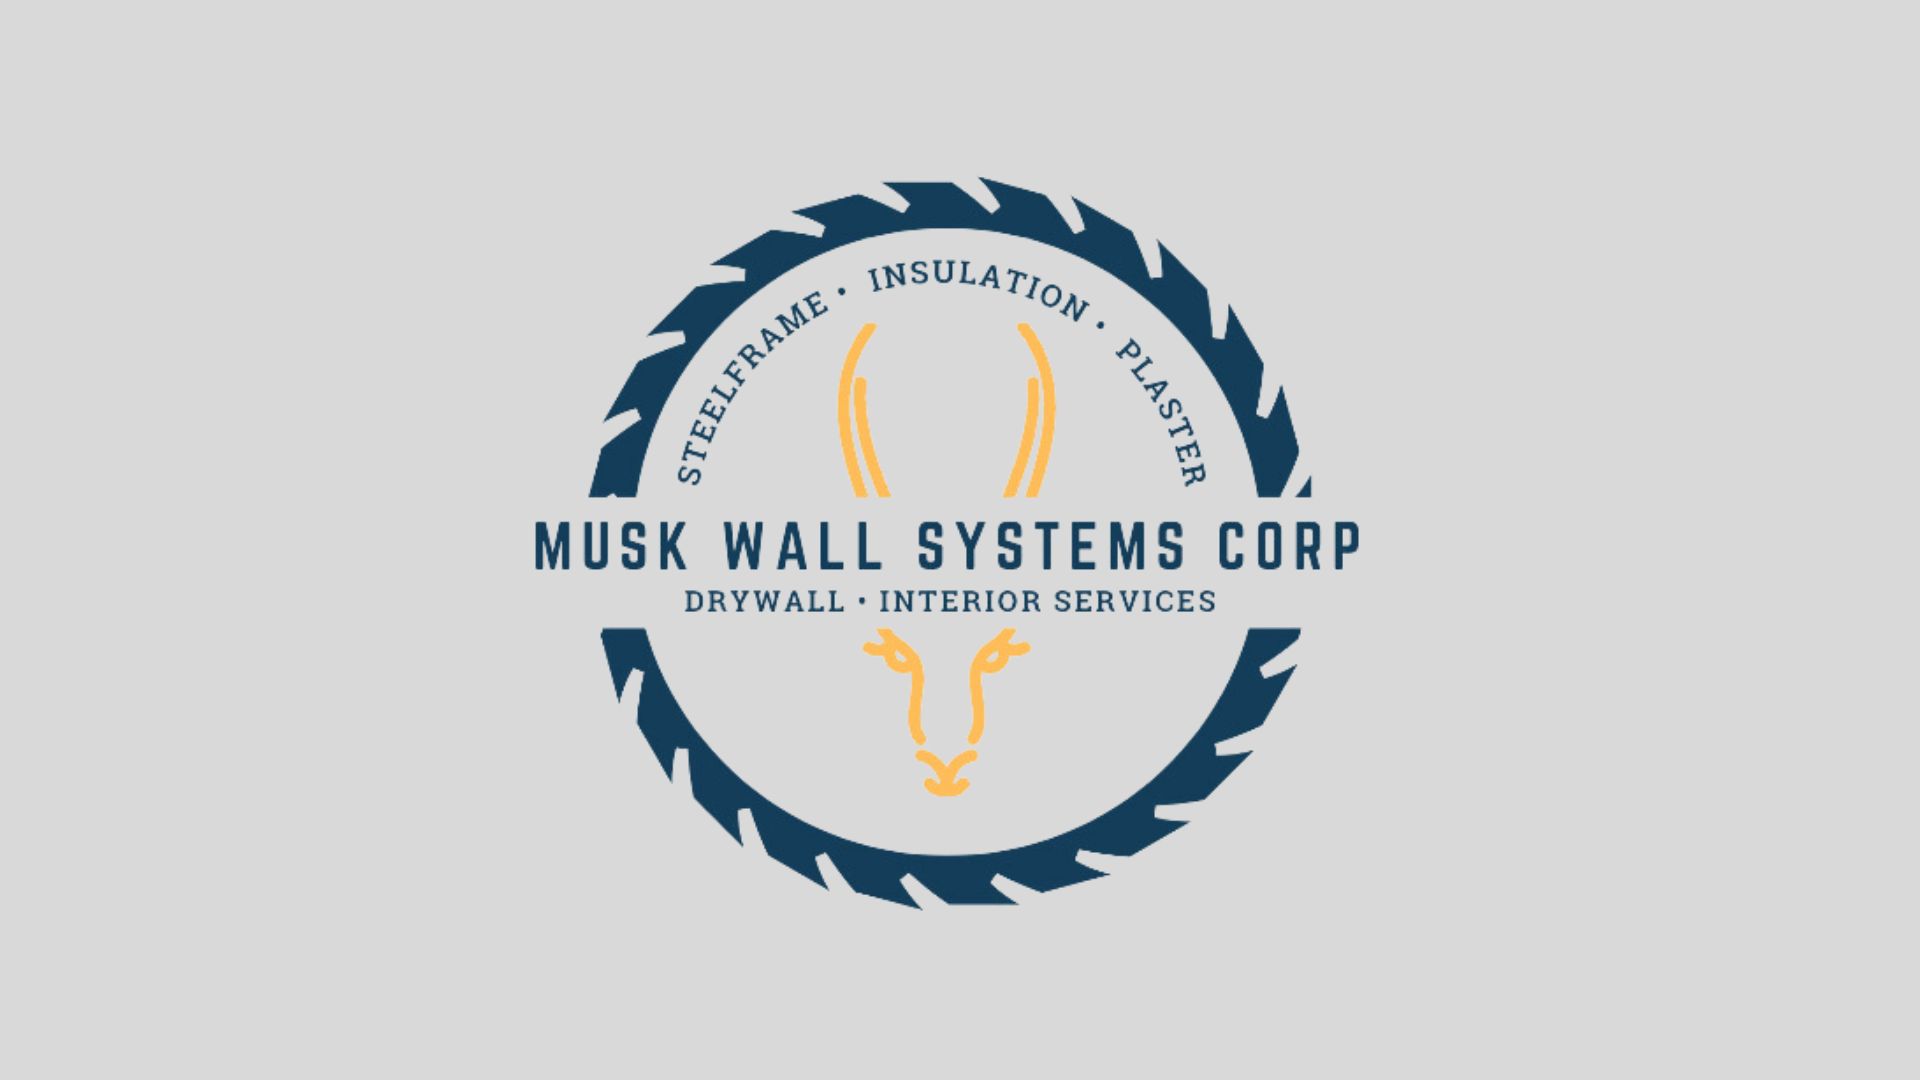 Musk Wall Systems Corp logo